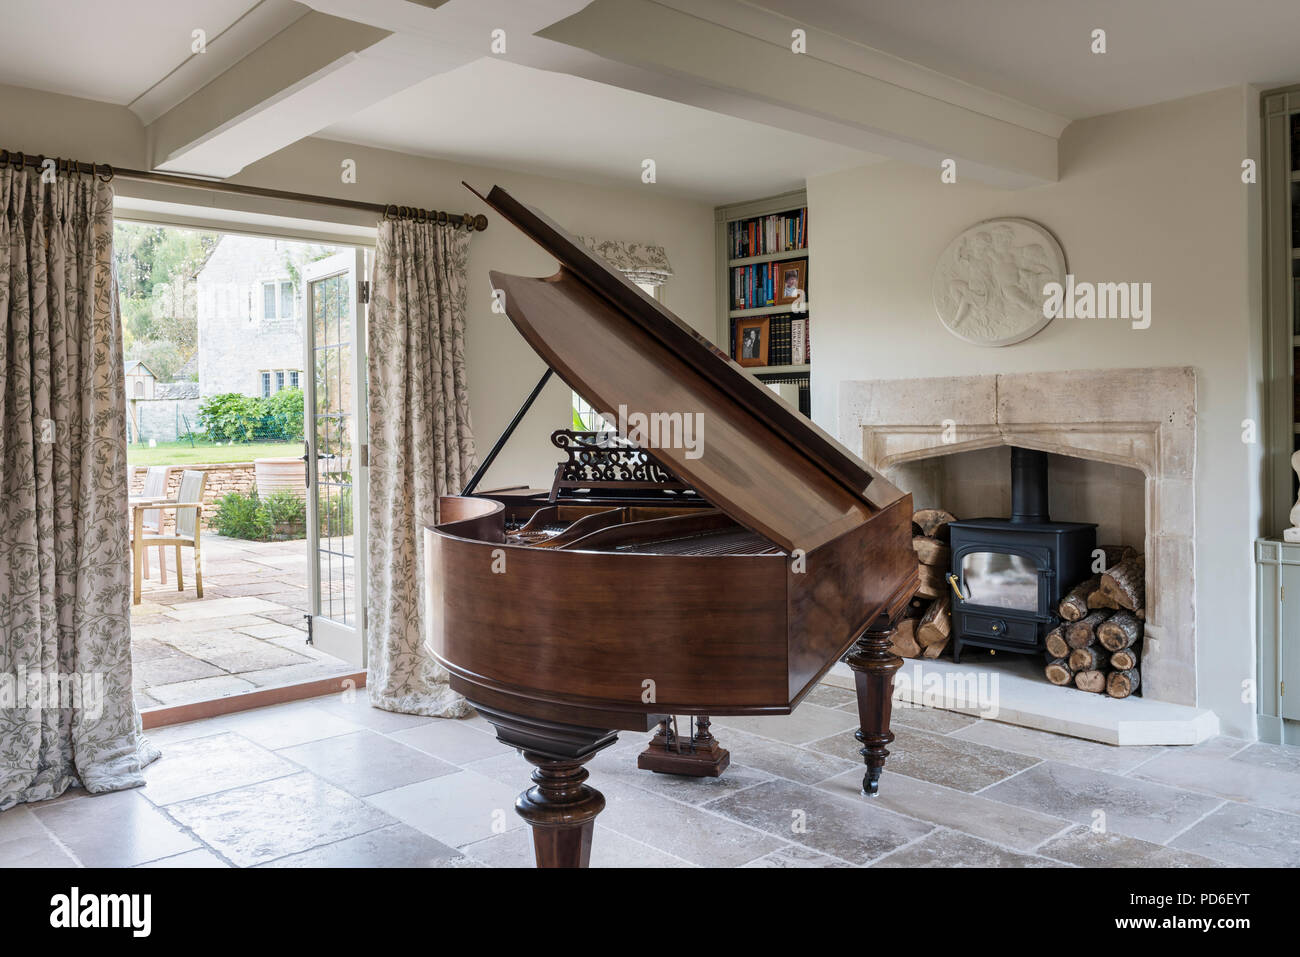 Grand piano and wood burning stove at open doorway. Stock Photo